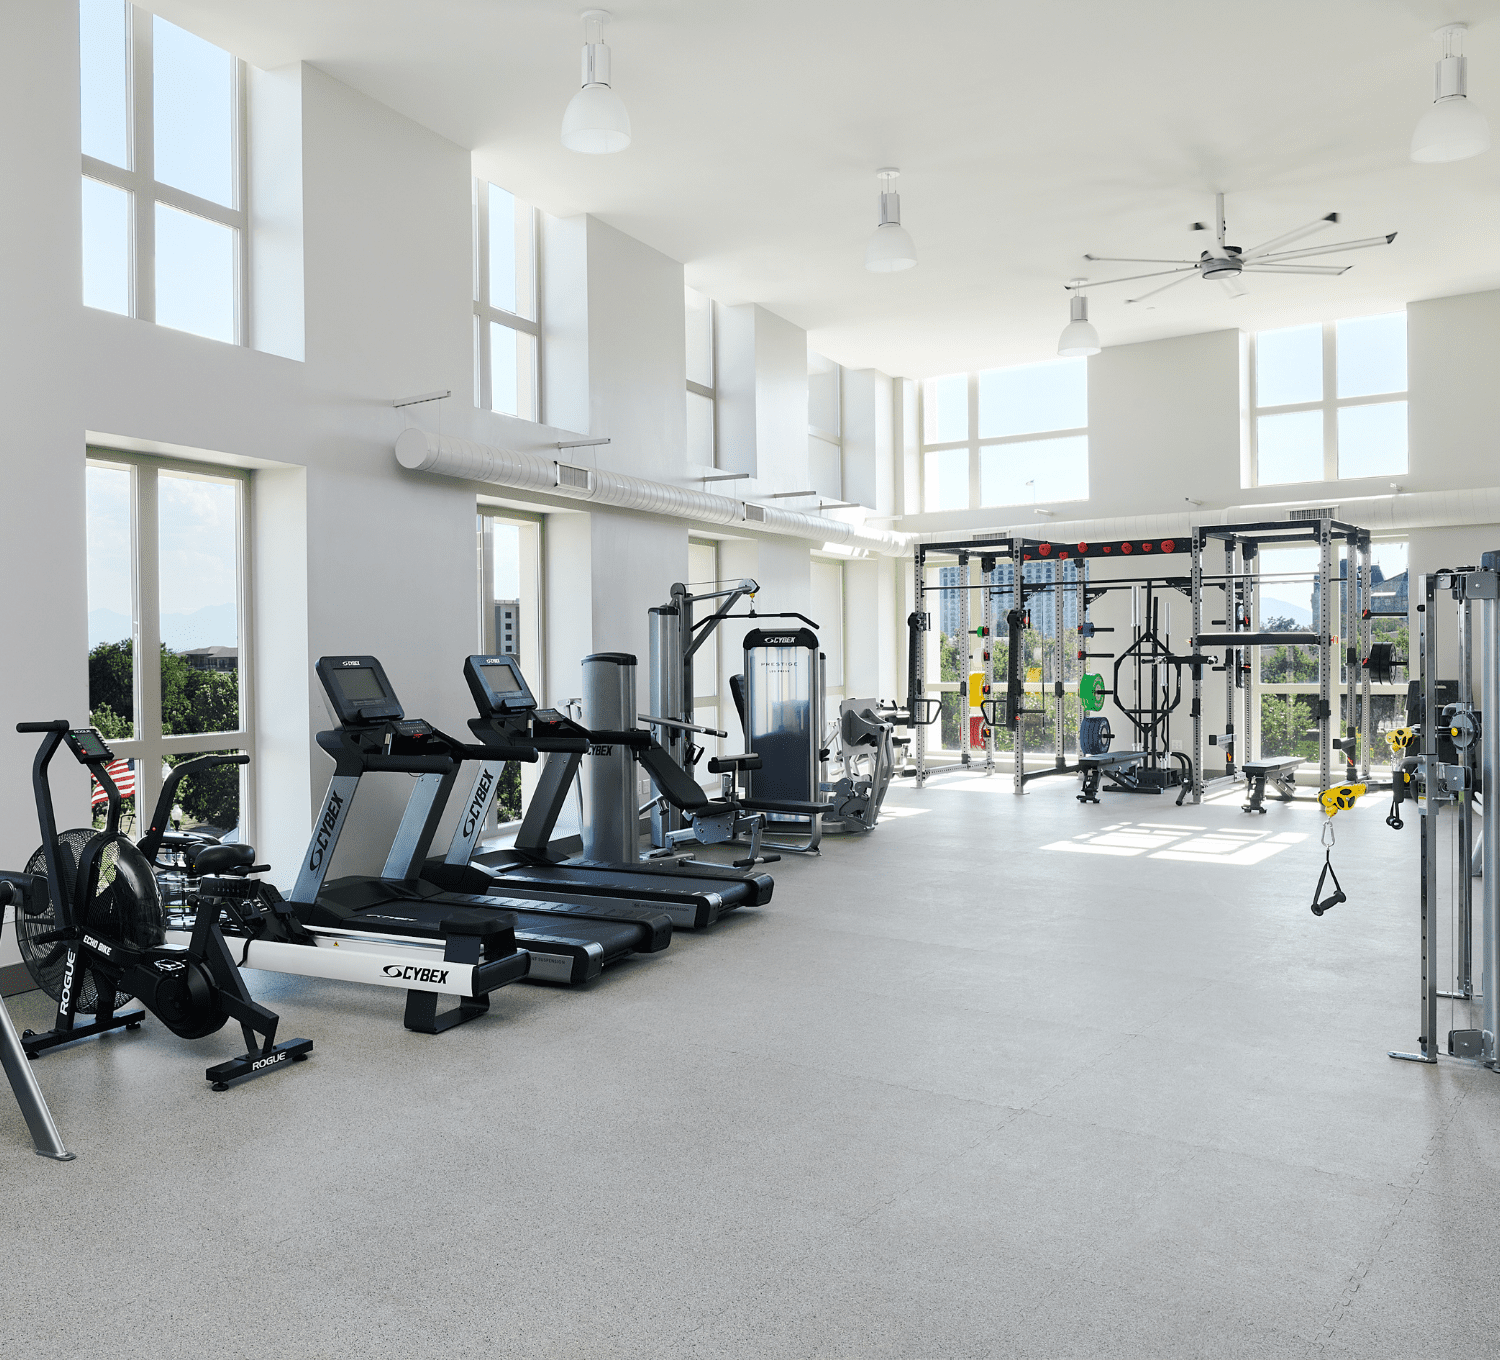 Avia apartment building fitness center and gym in Salt Lake City